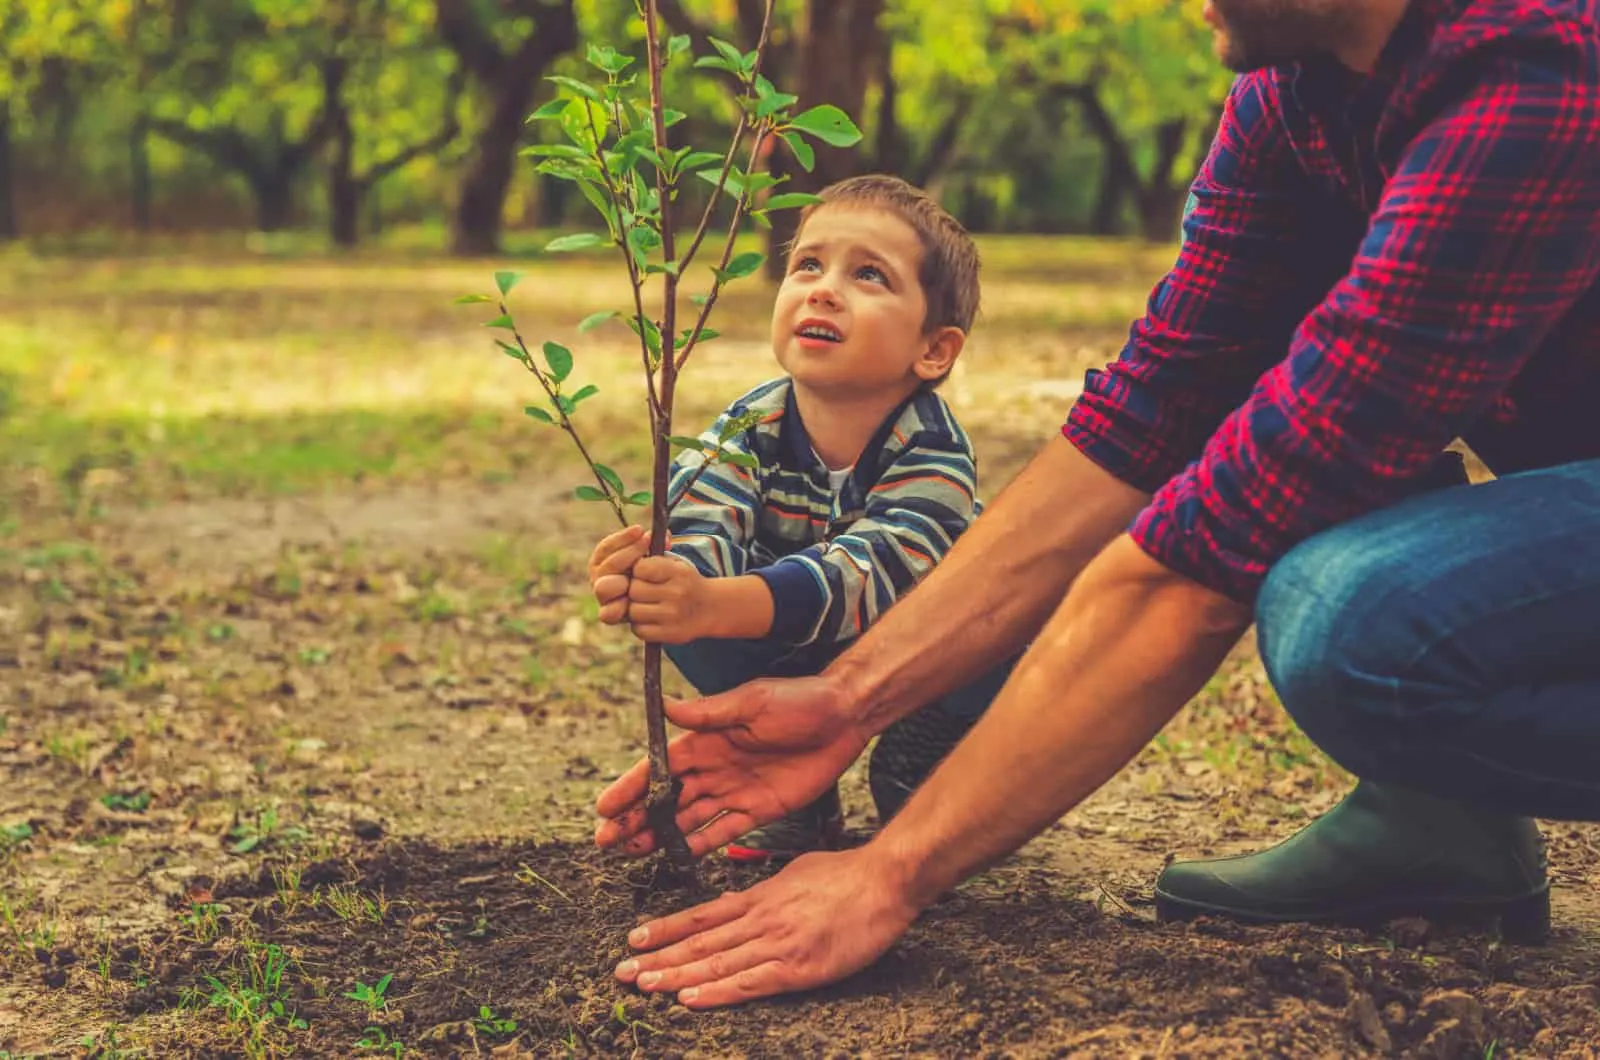 father and son planting a tree